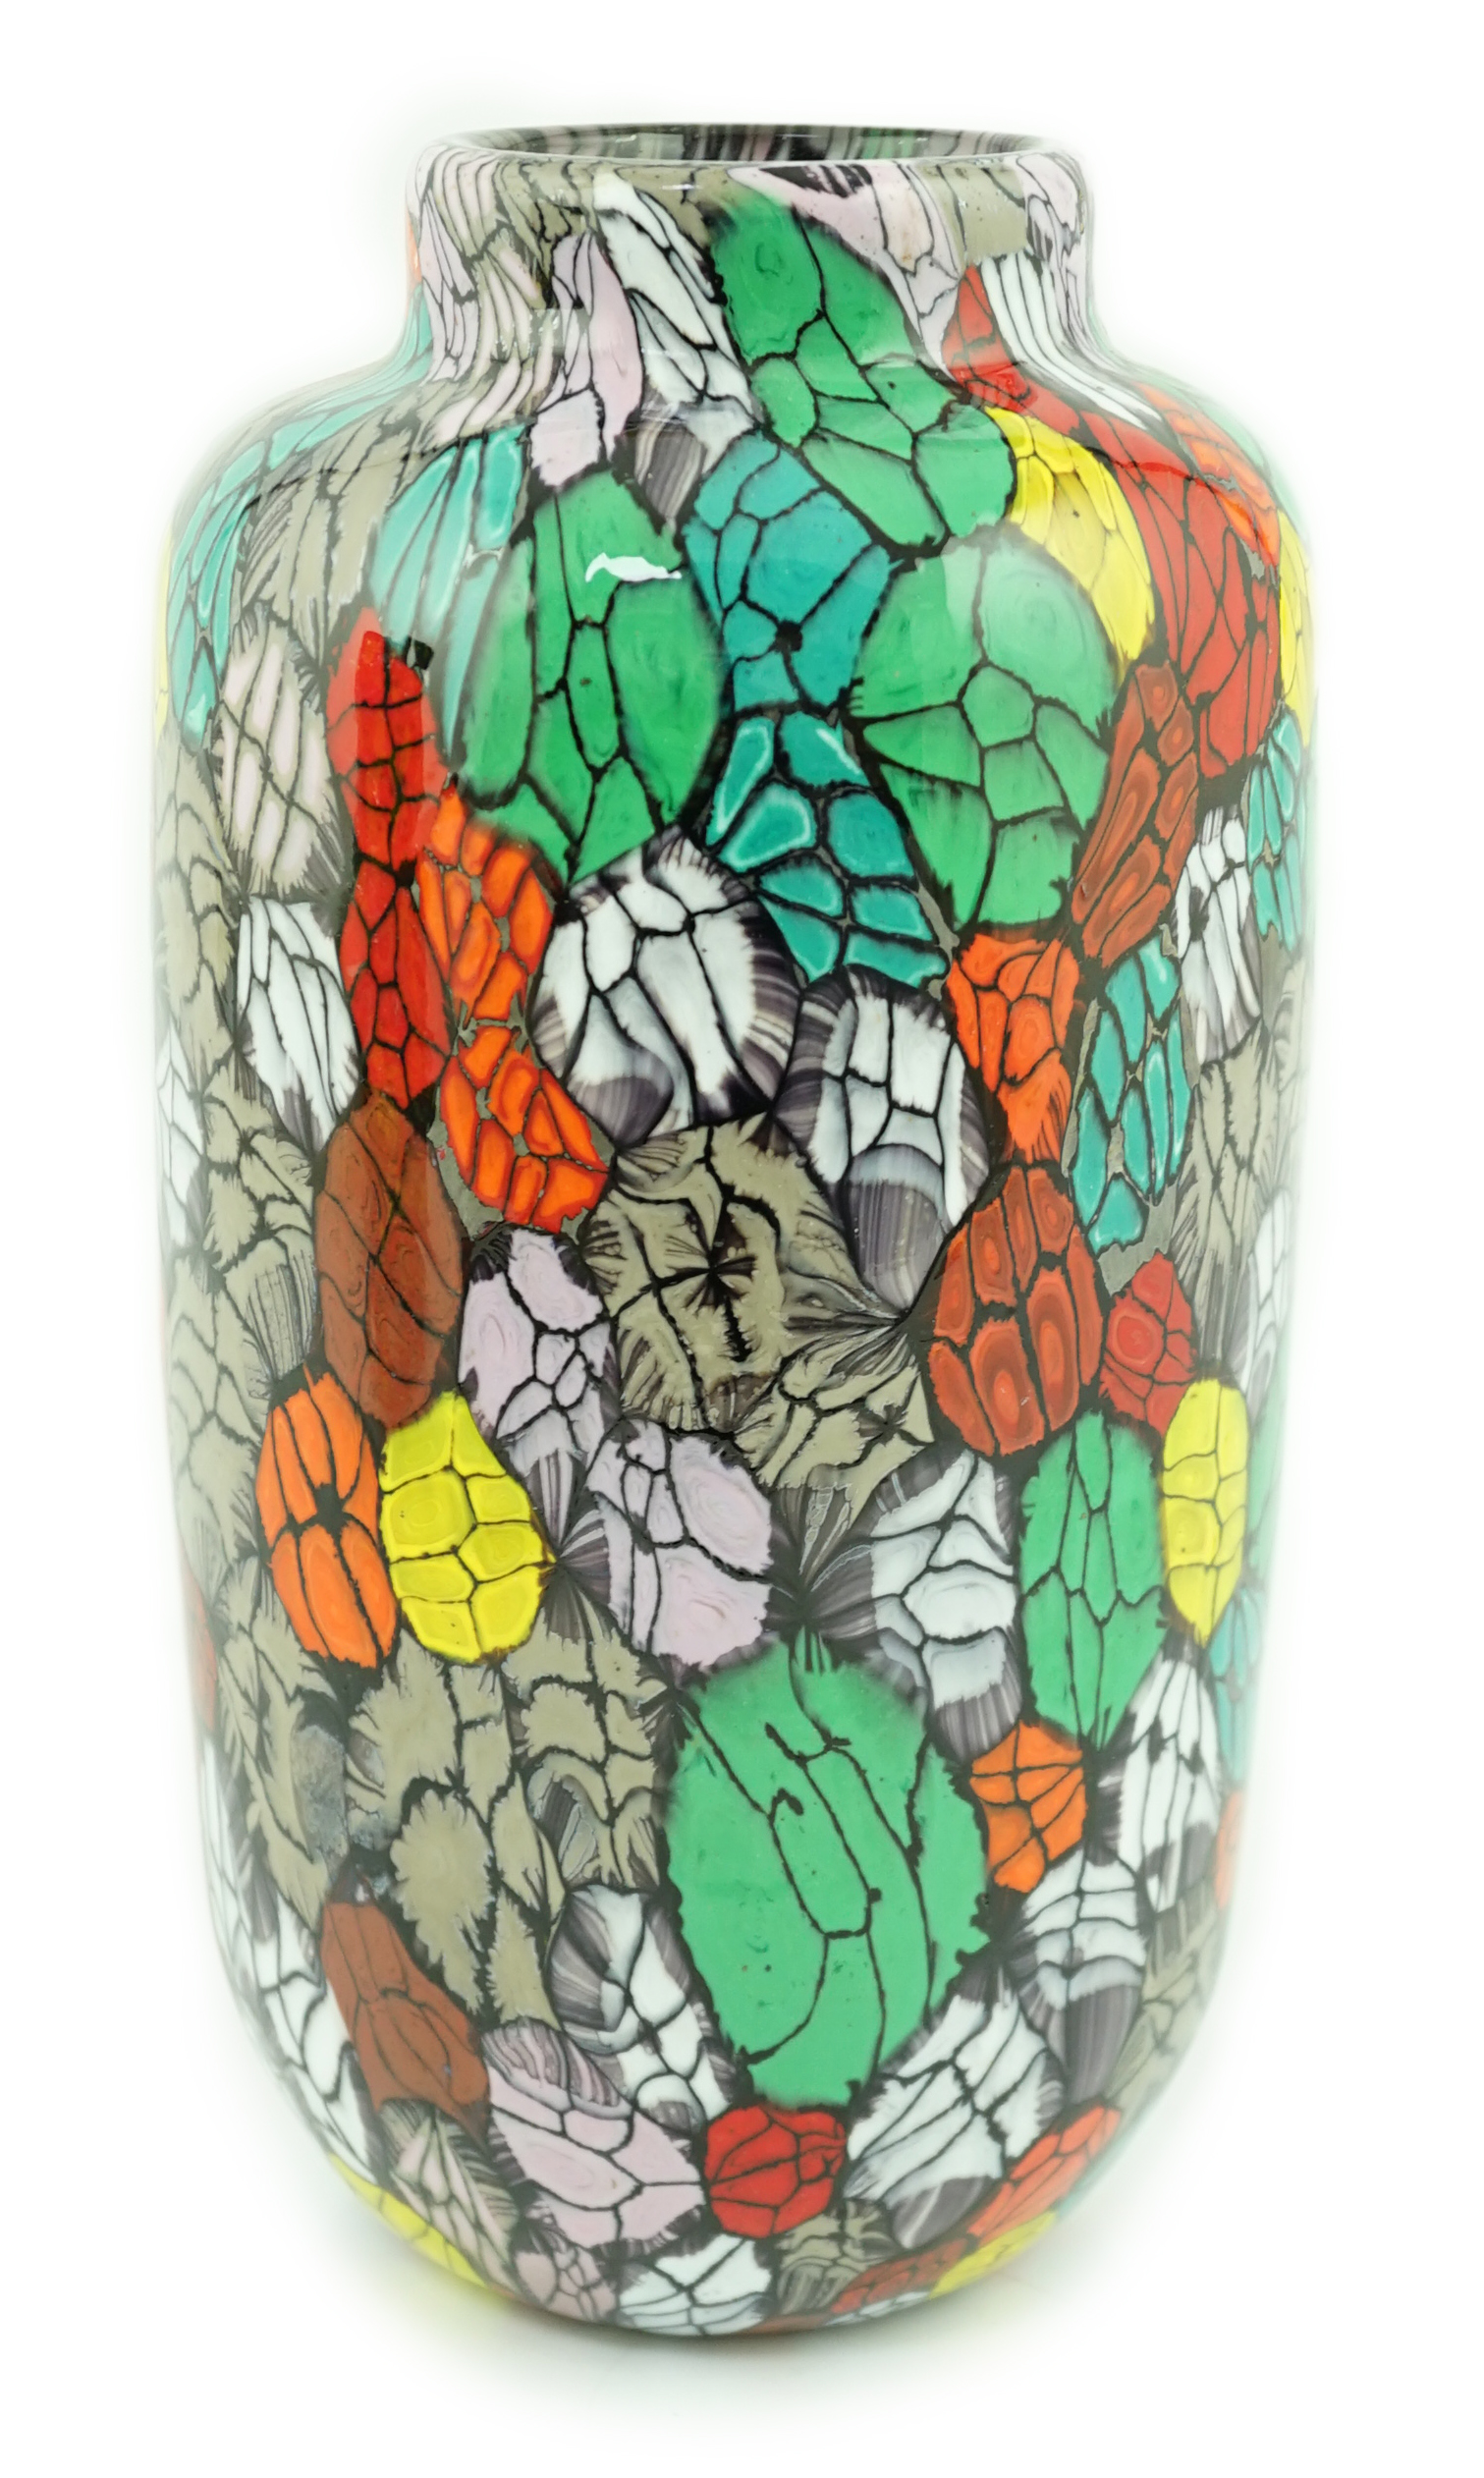 Vittorio Ferro (1932-2012) A Murano glass Murrine vase, with a multicoloured leaf design, signed, 27cm, Please note this lot attracts an additional import tax of 20% on the hammer price